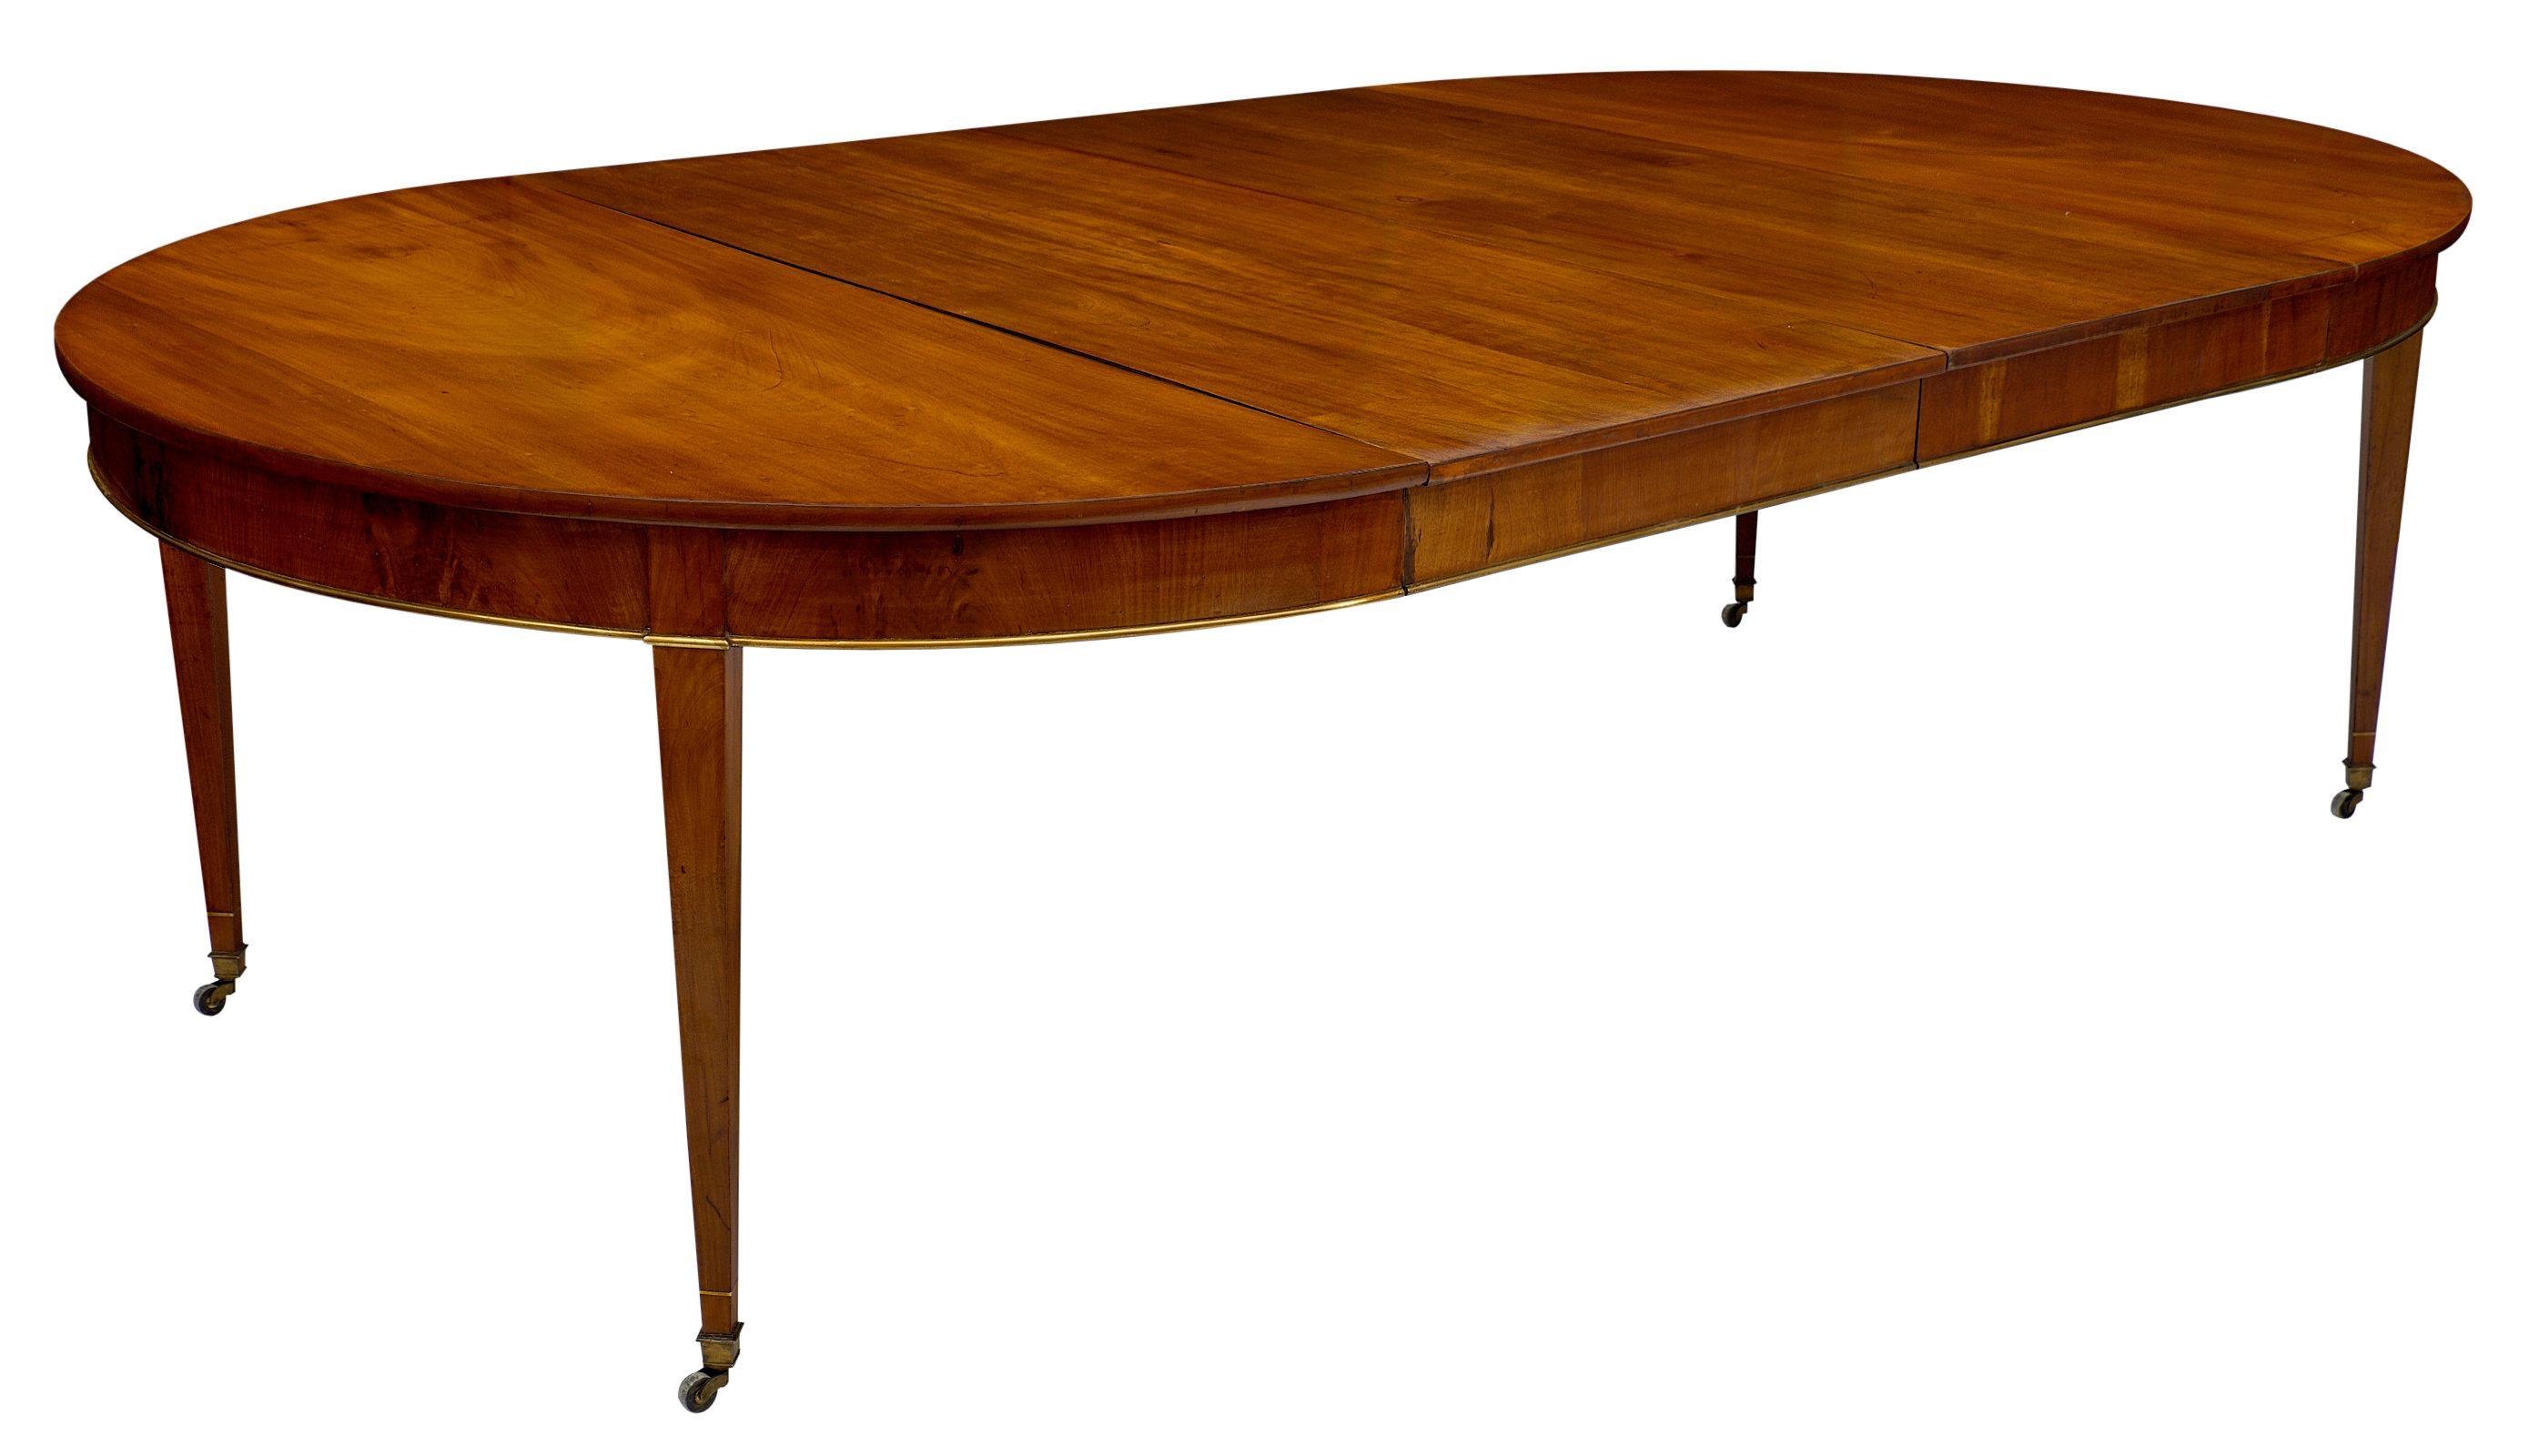 Early 19th Century Flamed Mahogany Directoire Dining Table